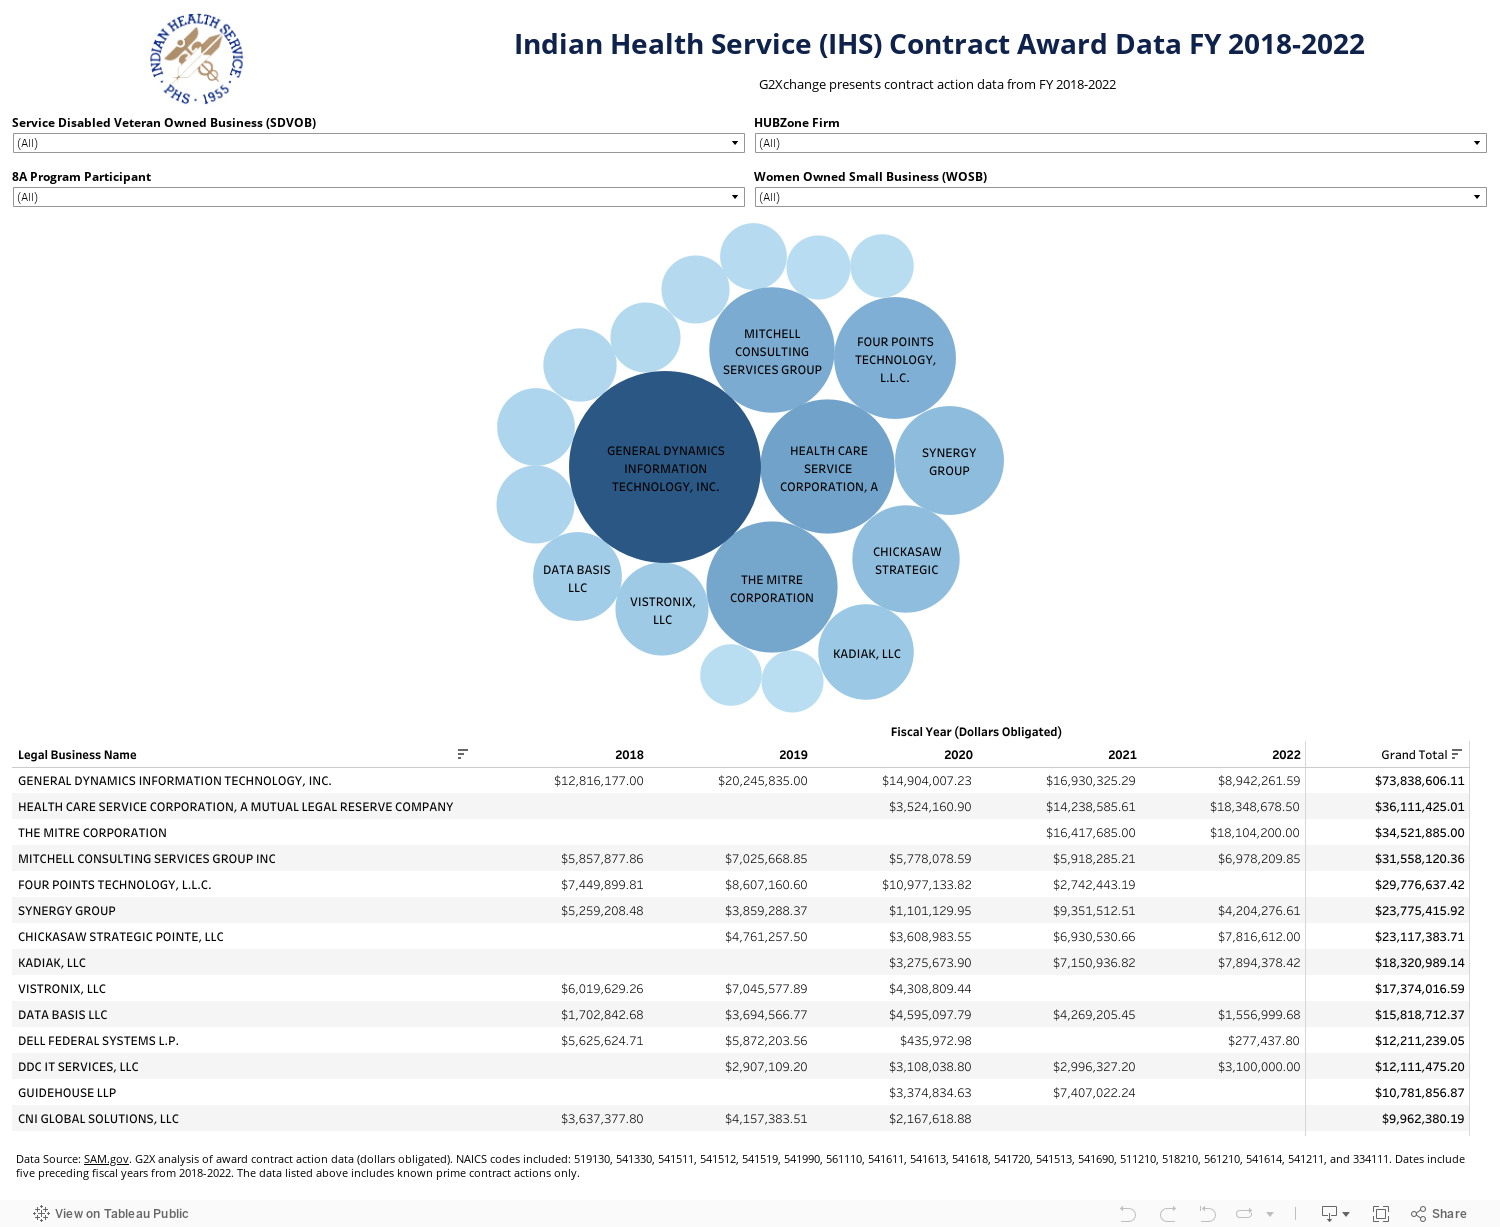 Indian Health Service (IHS) Contract Award Data FY 2018-2022